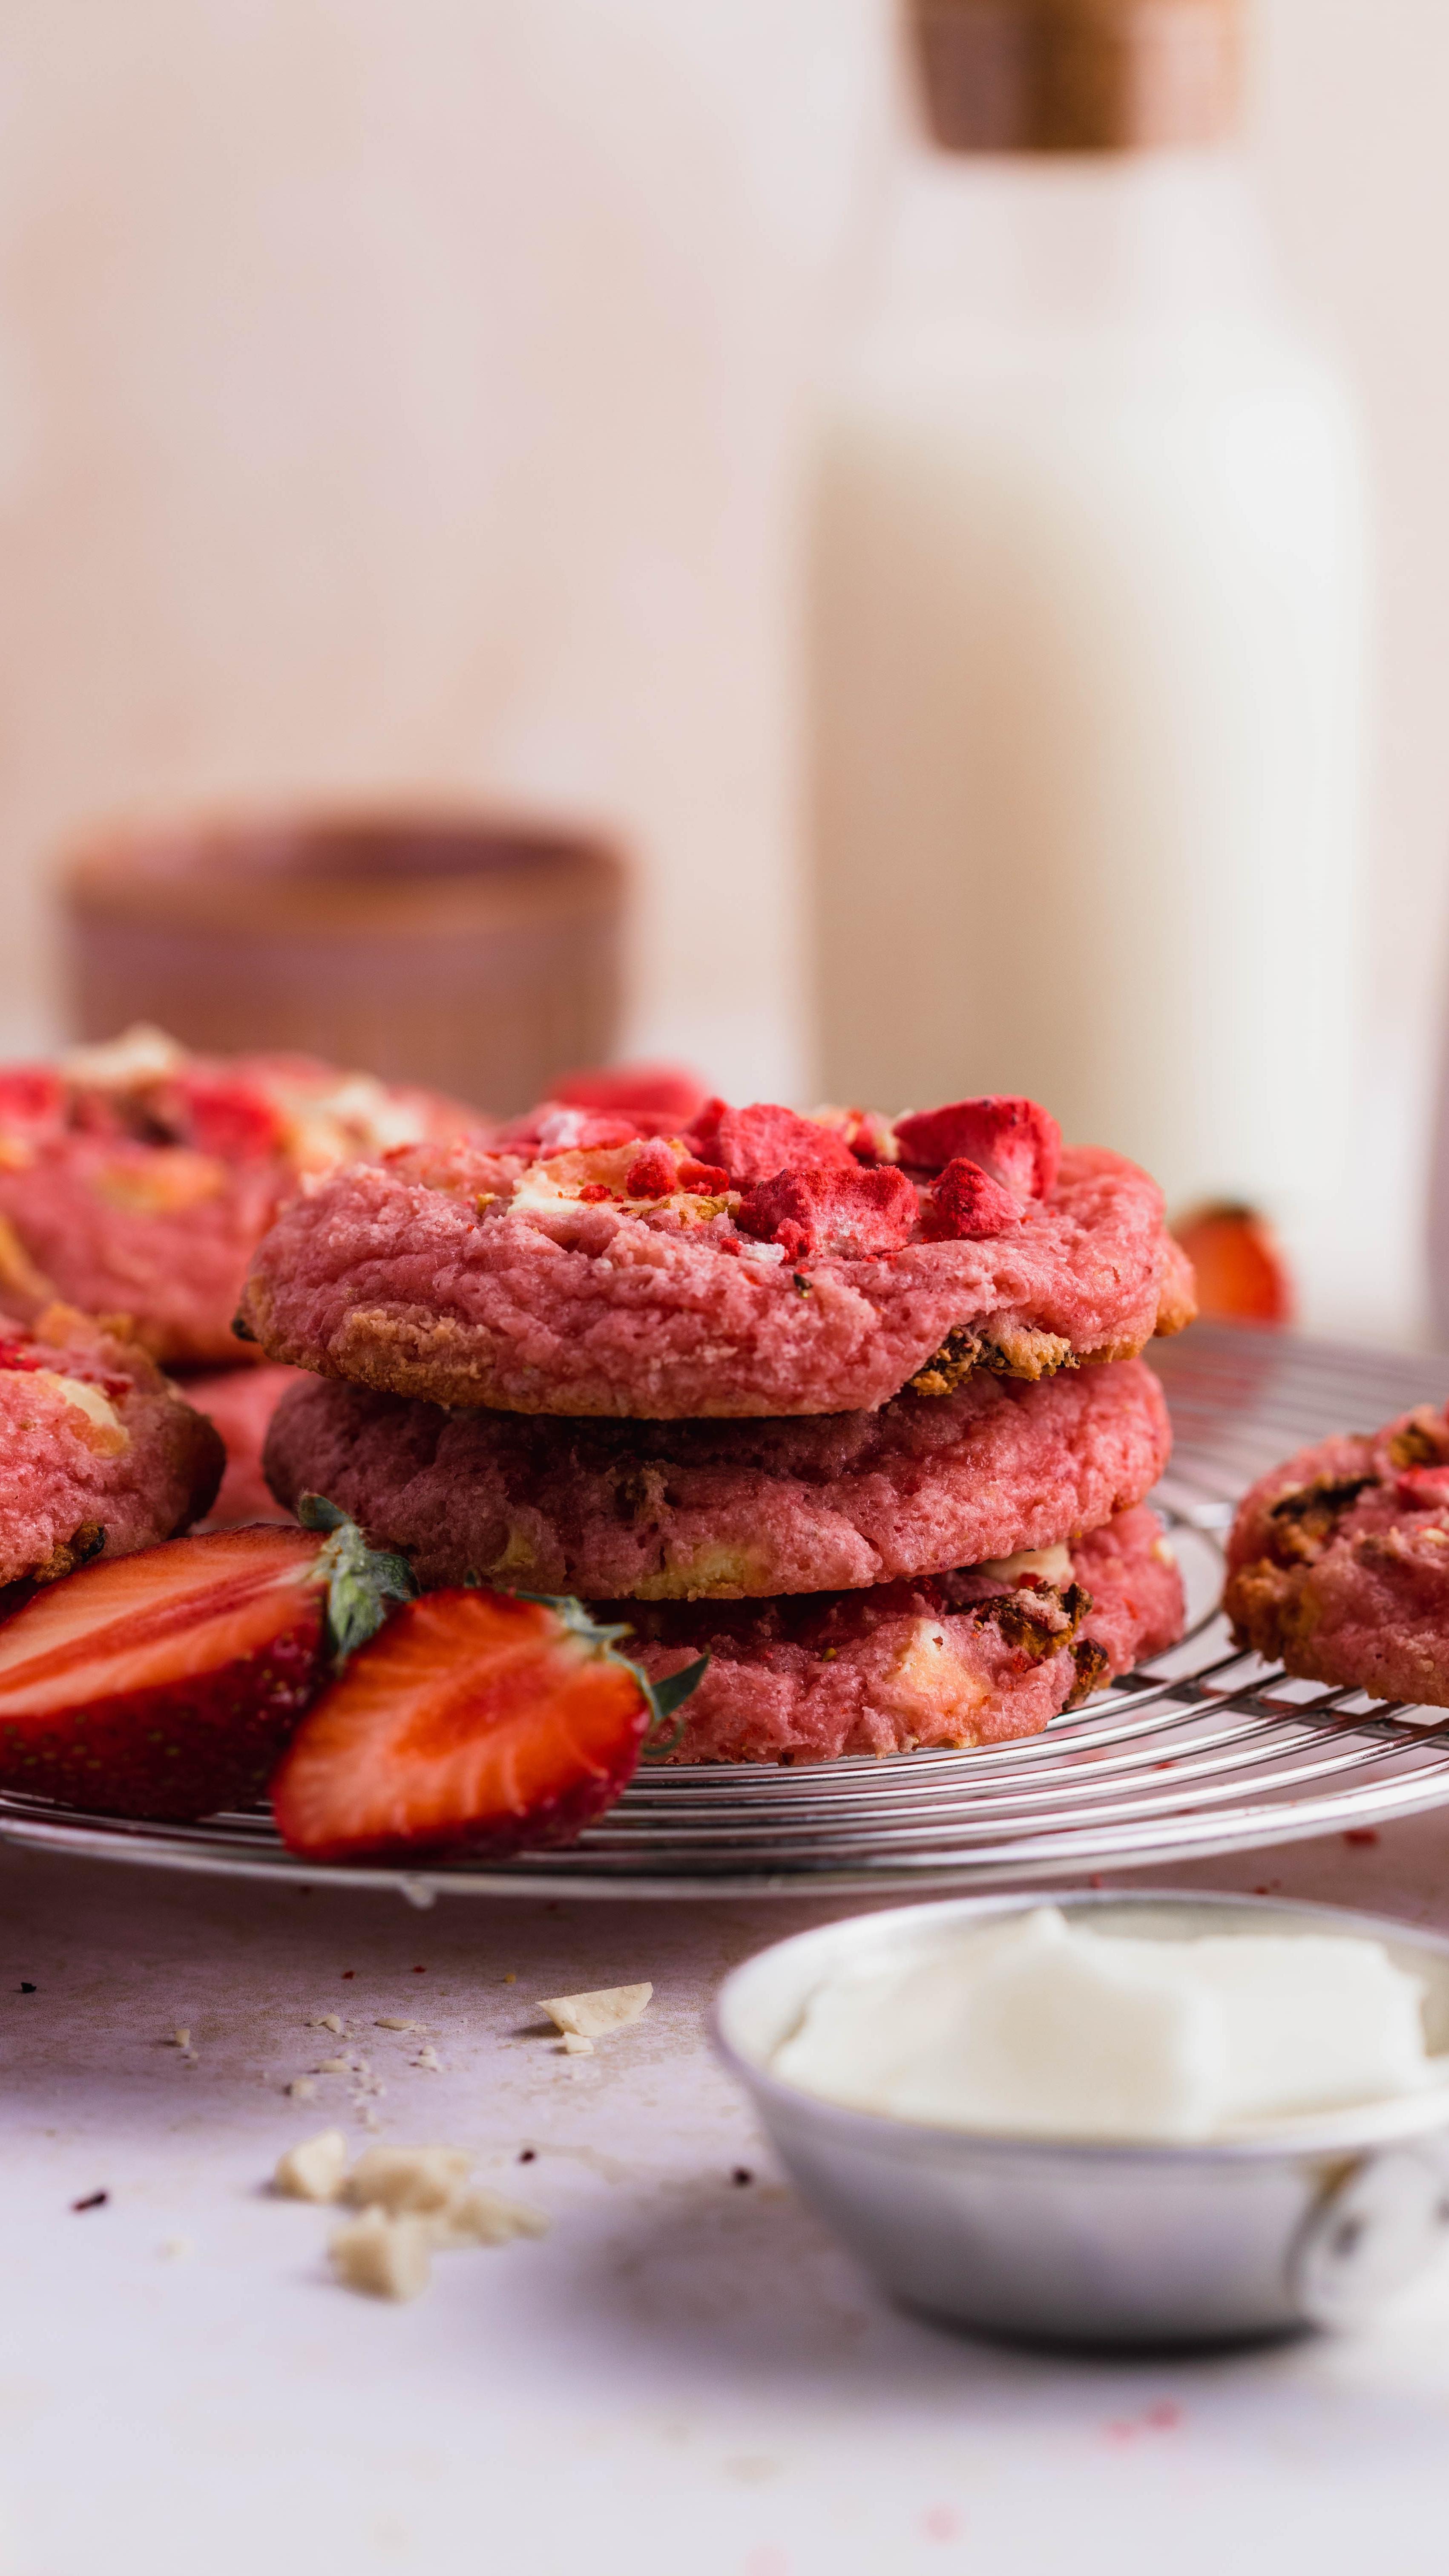 If you like strawberries, you'll love these strawberry cookies! They are chewy and full of juicy strawberry flavour, so delicious and fun to make🥰❤️ Get the recipe on the blog, link is in my bio!

https://thechestnutbakery.com/easy-vegan-strawberry-cookies/
Or search "strawberry cookies" in the search bar on the blog!

Have a nice start to the week my friends! 
:
:
:
:
:
#strawberrycookies #cookies #strawberries #vegancookies #cookierecipe #strawberrydesserts #環境に優しい #プラントベース #デザート #ベーキング #ビーガン #サスティナブル #ヴィーガン #ビーガンスイーツ #ビーガンレシピ
#veganfood #foodphotography #sustainalbelife #vegan #vegandessert #healthylifestyle #veganbaking #crueltyfree #veganrecipe #plantbased #baking #veganlife